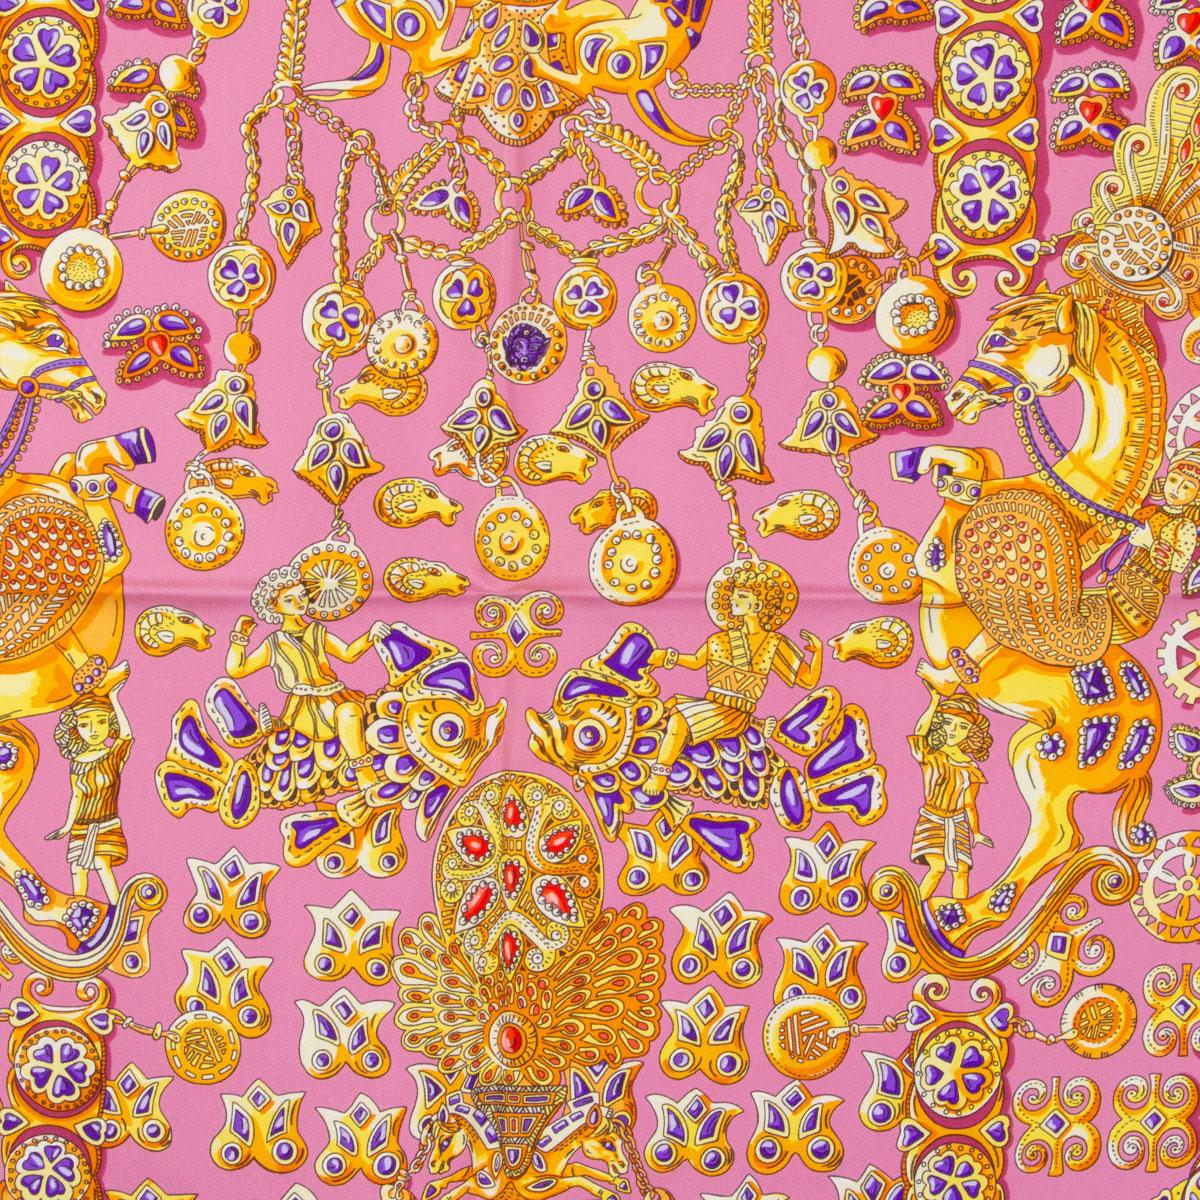 Hermes 'Tresors Retrouves 90' scarf by Annie Faivre in dusty pink silk twill (100%) with fuchsia border and details in purple and gold. Has been worn and is in excellent condition.

Width 90cm (35.1in)
Height 90cm (35.1in)